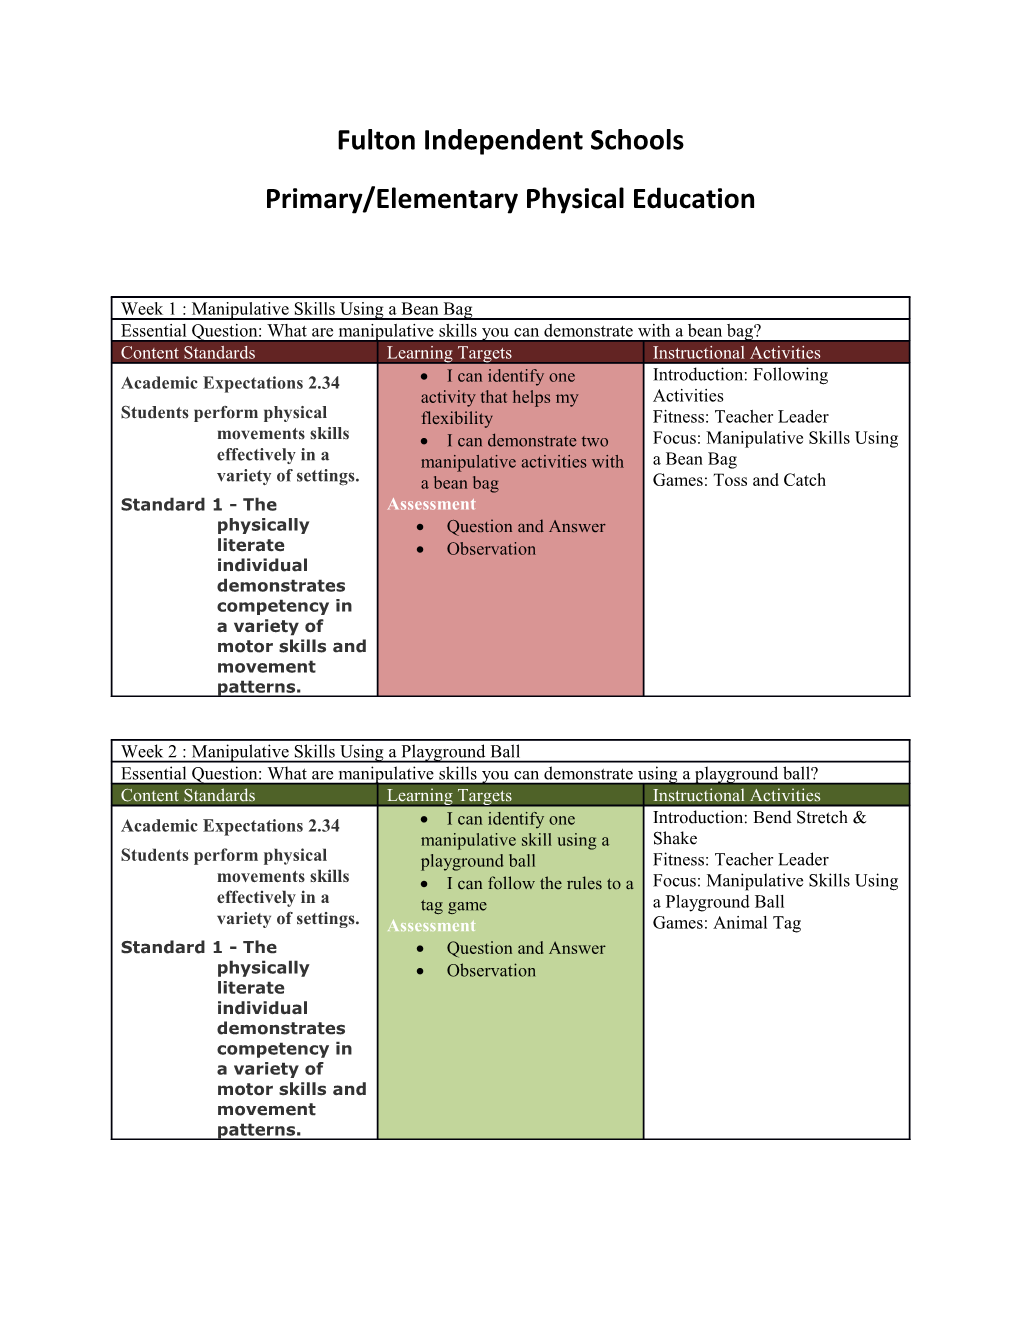 Primary/Elementary Physical Education